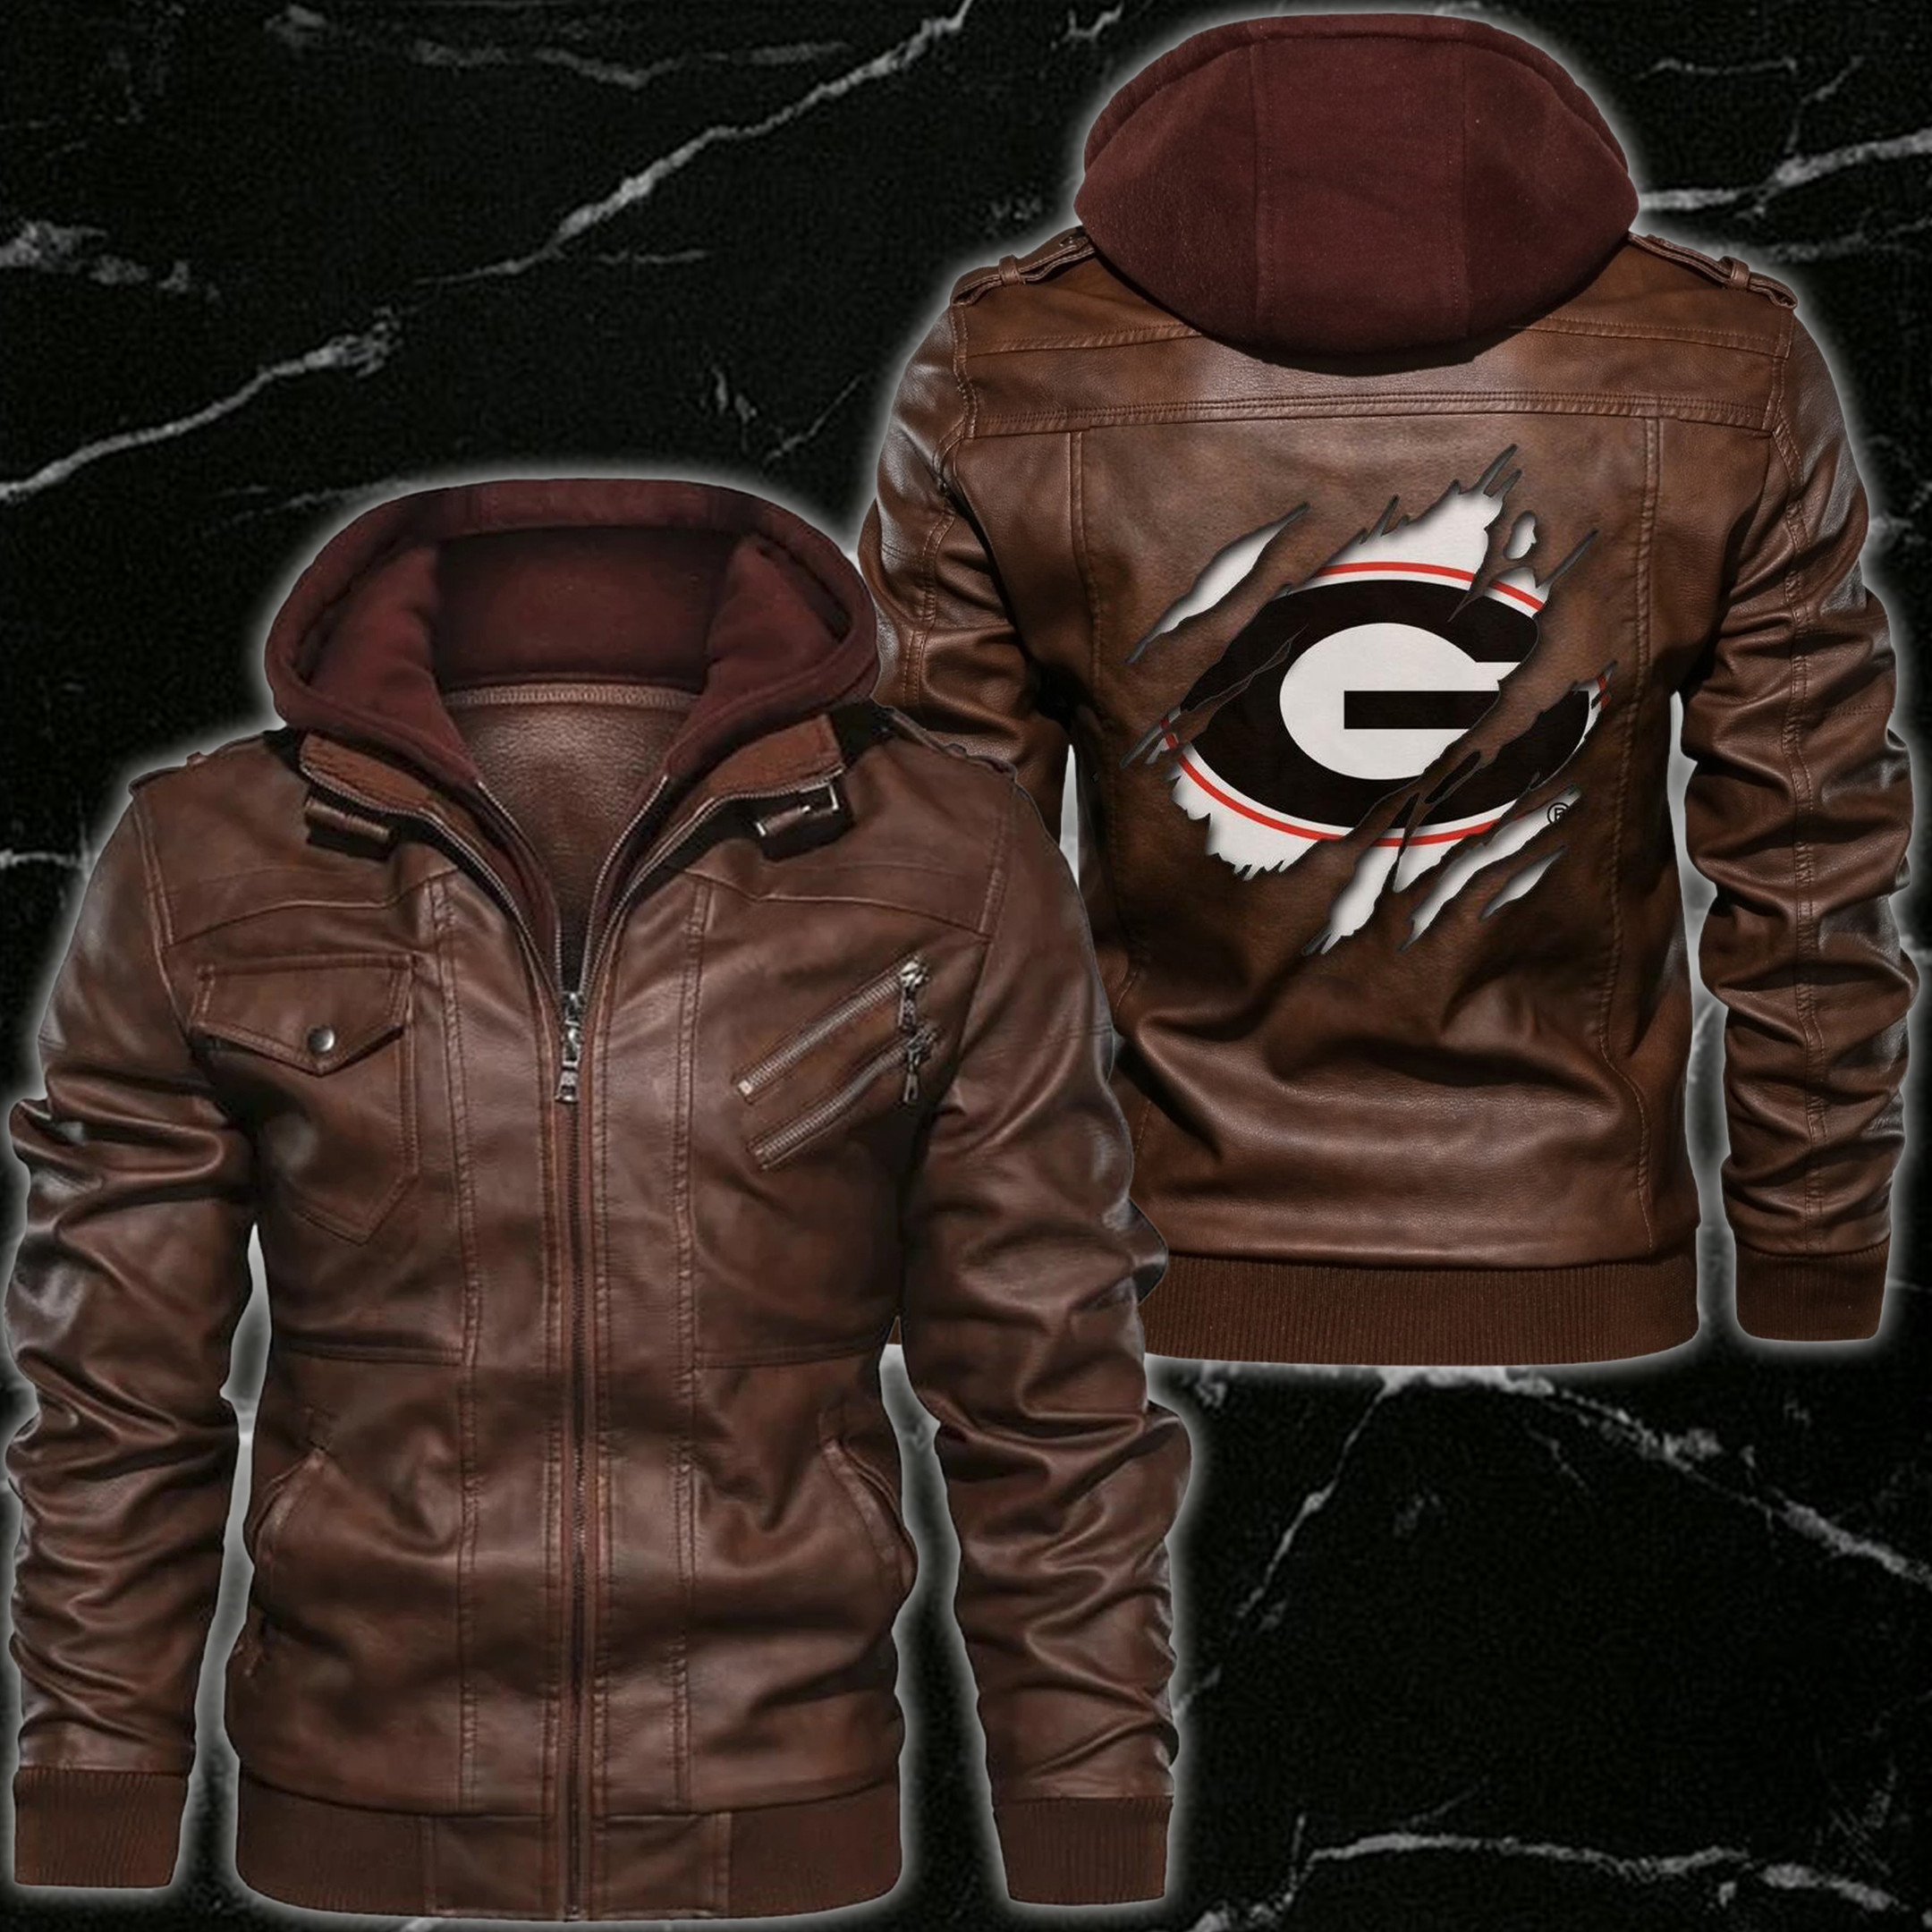 You can find a good leather jacket by access our website 74